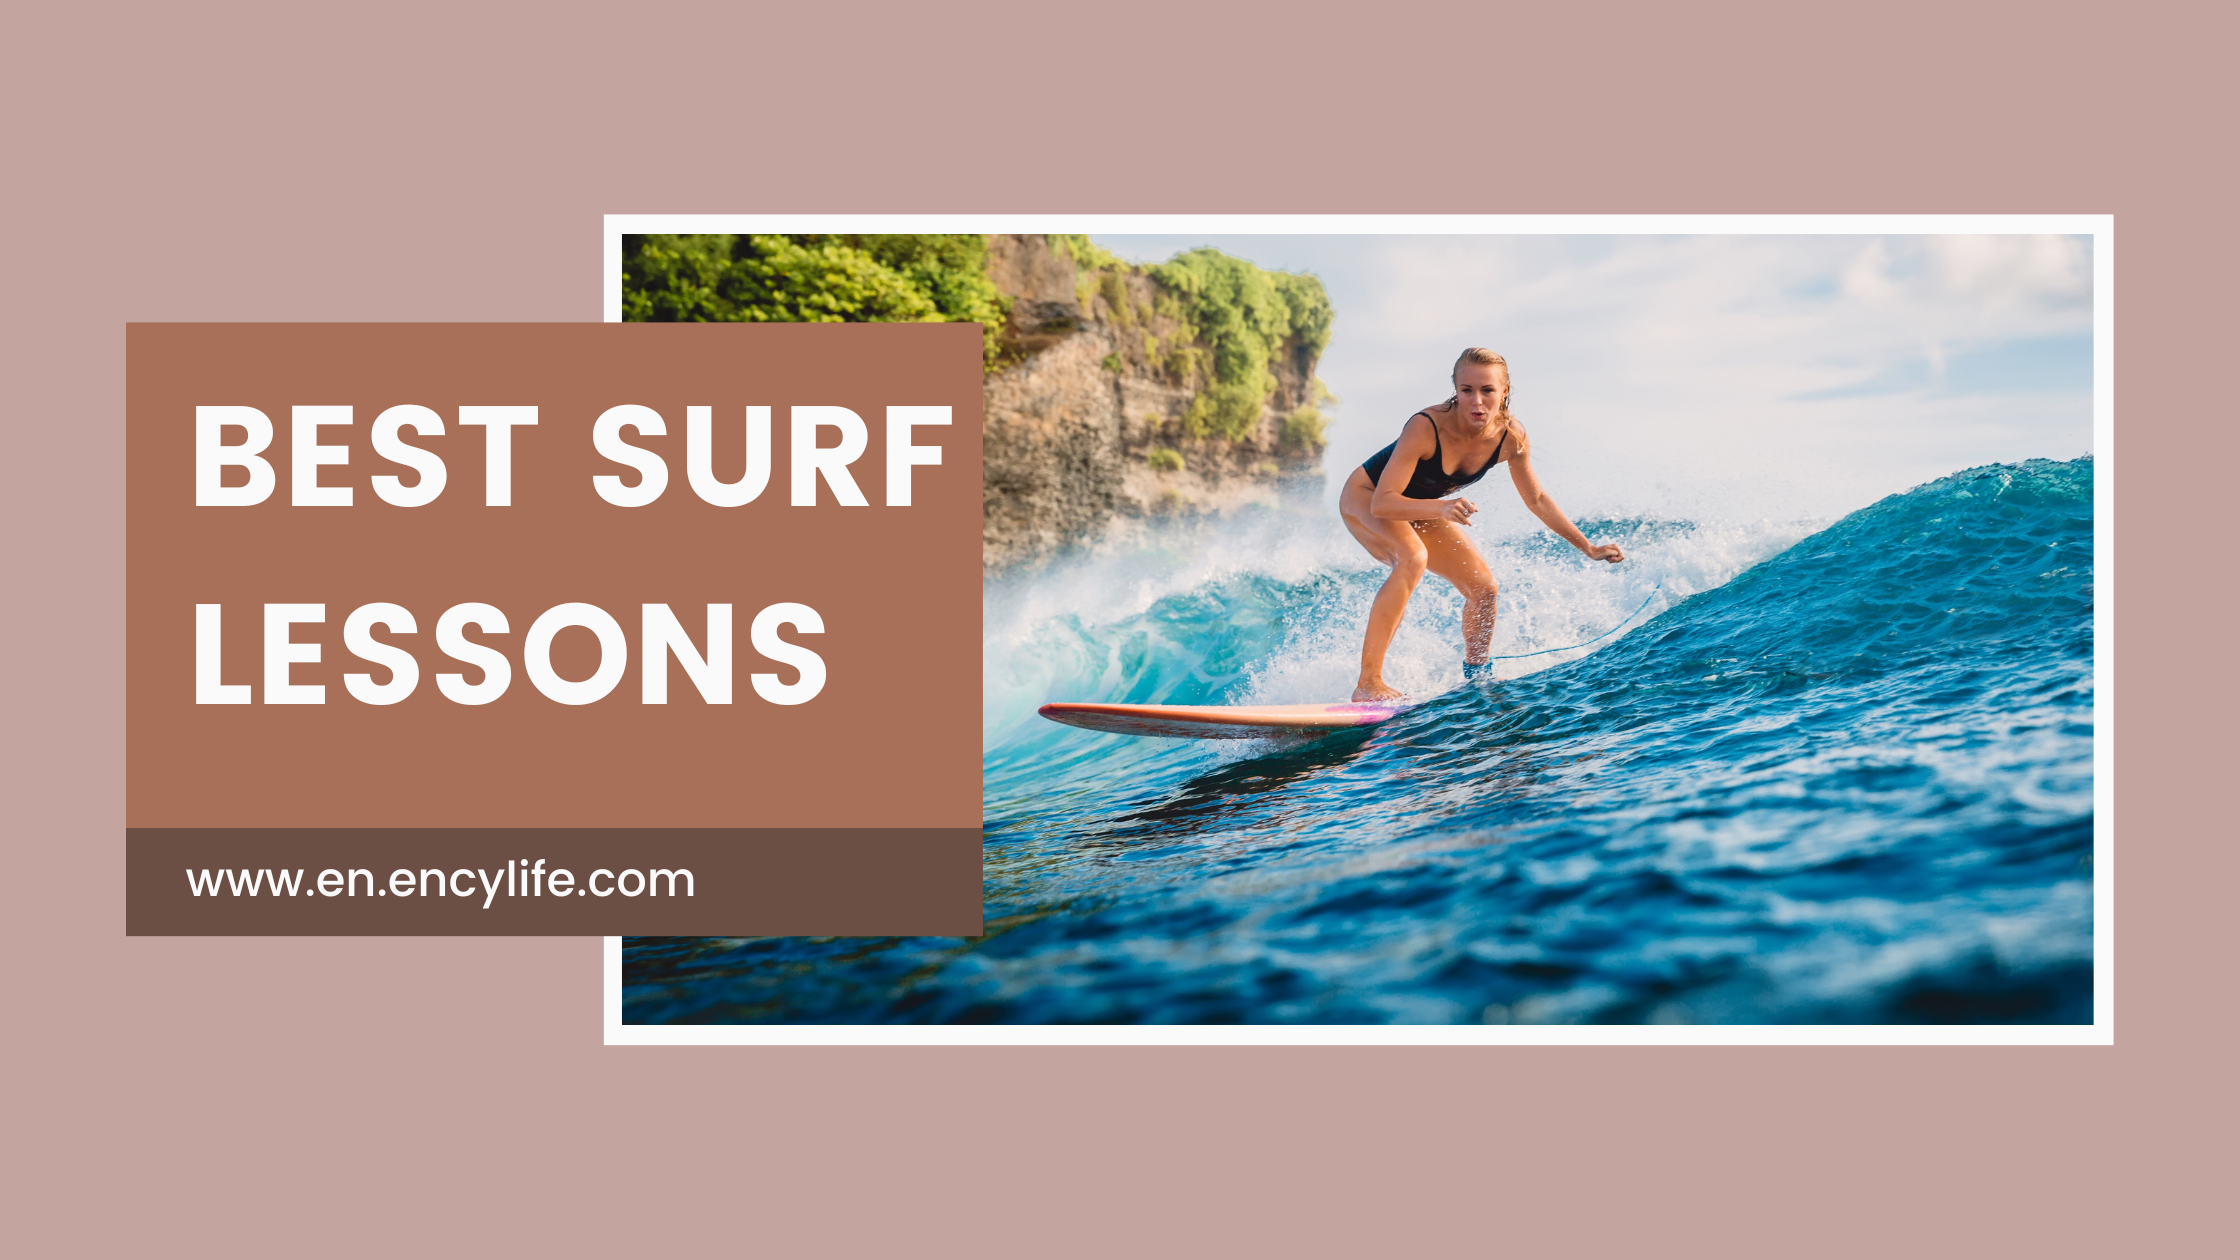 Experience the Waves with the Best Surf Lessons in Town!